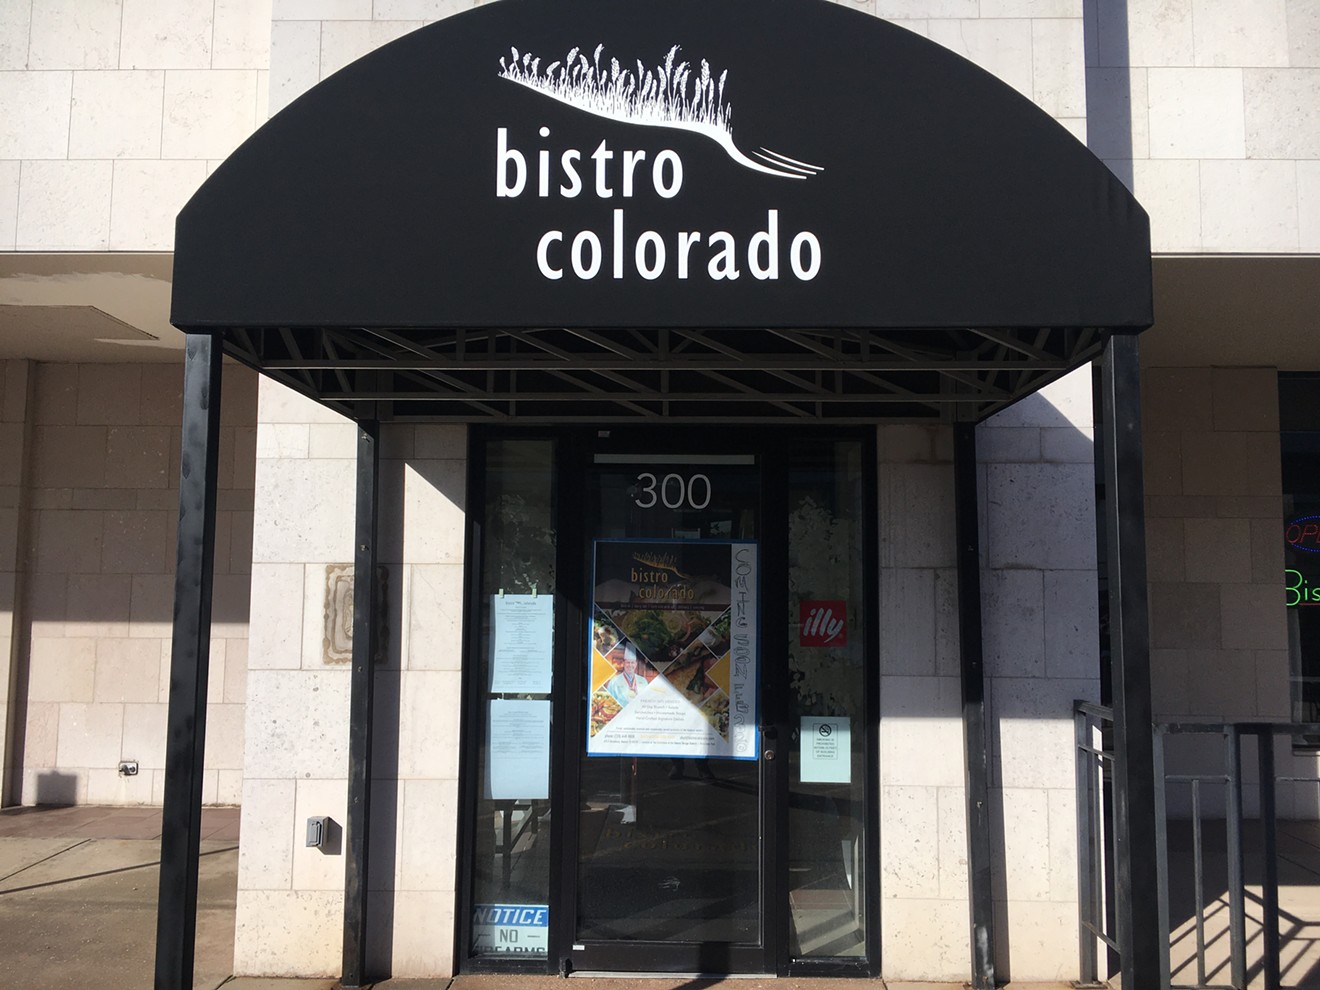 Bistro Colorado is now open in the former home of Assignments.